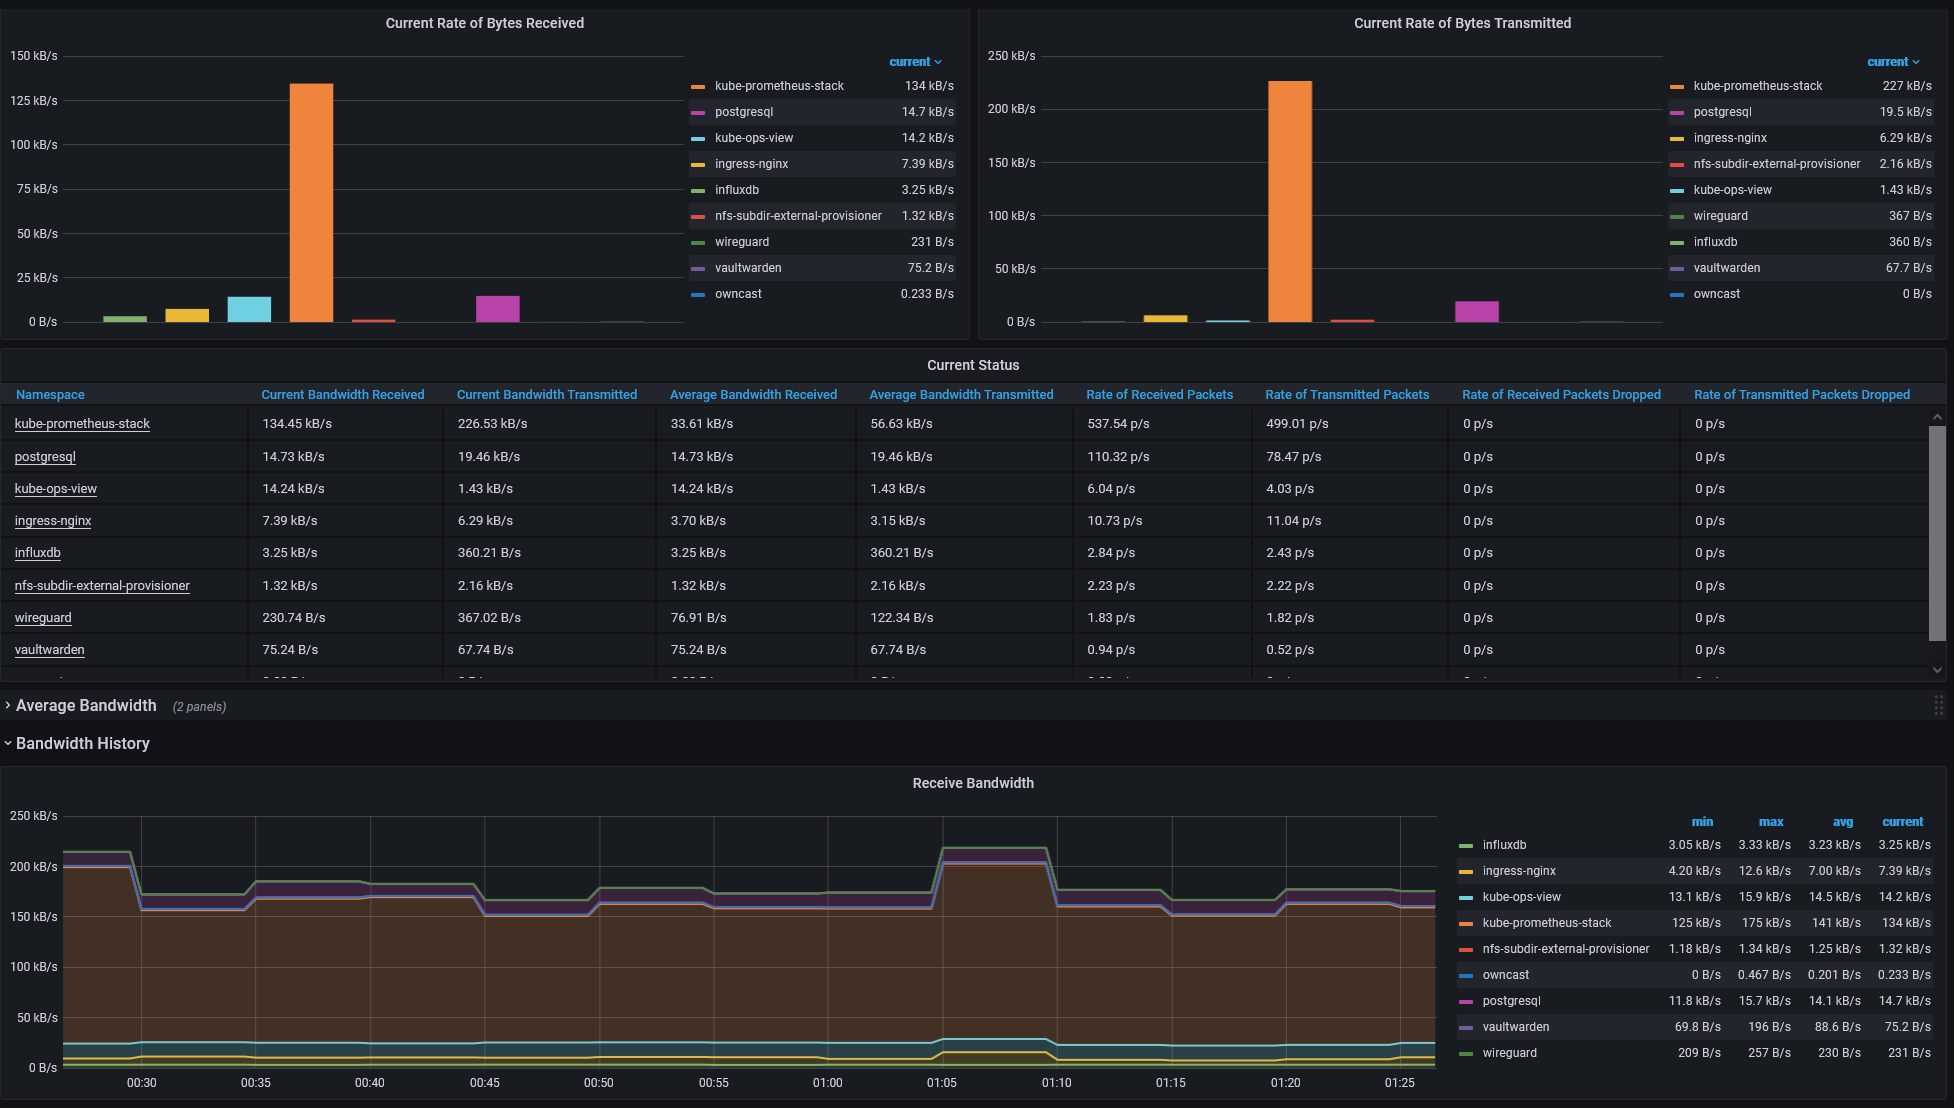 Snippet of the Network Dashboard